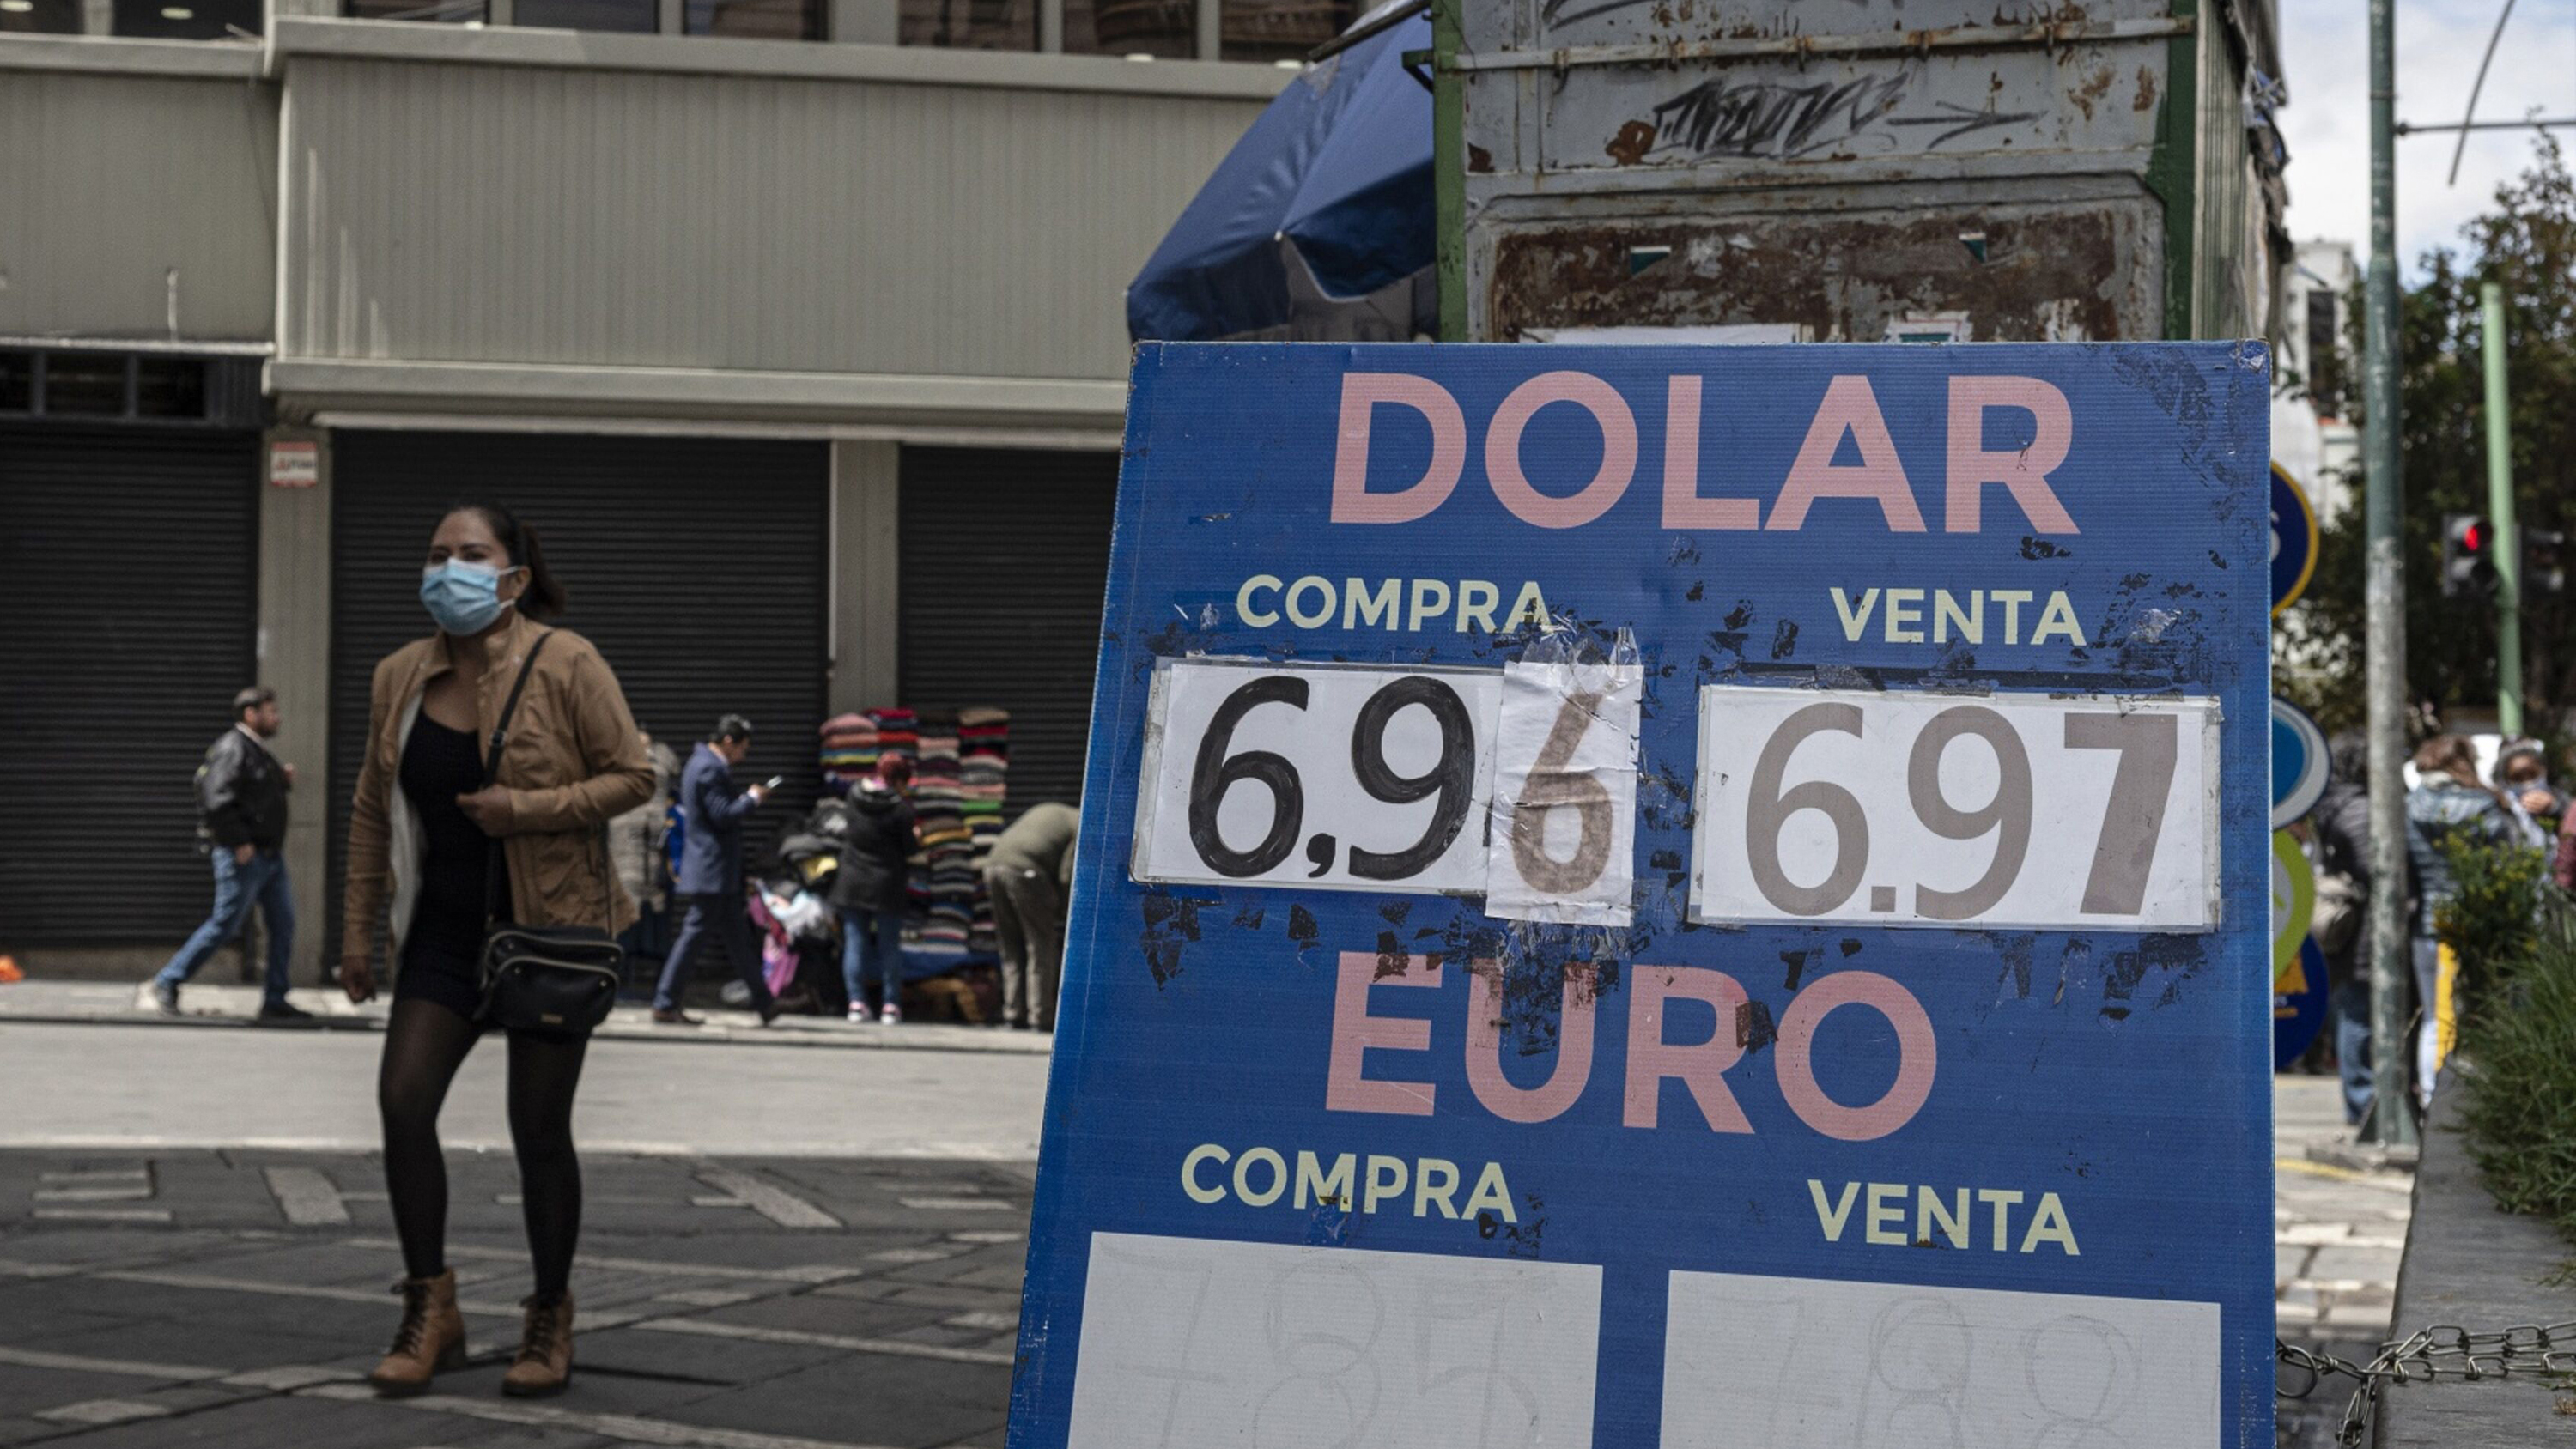 A dollar exchange rate sign in Bolivia